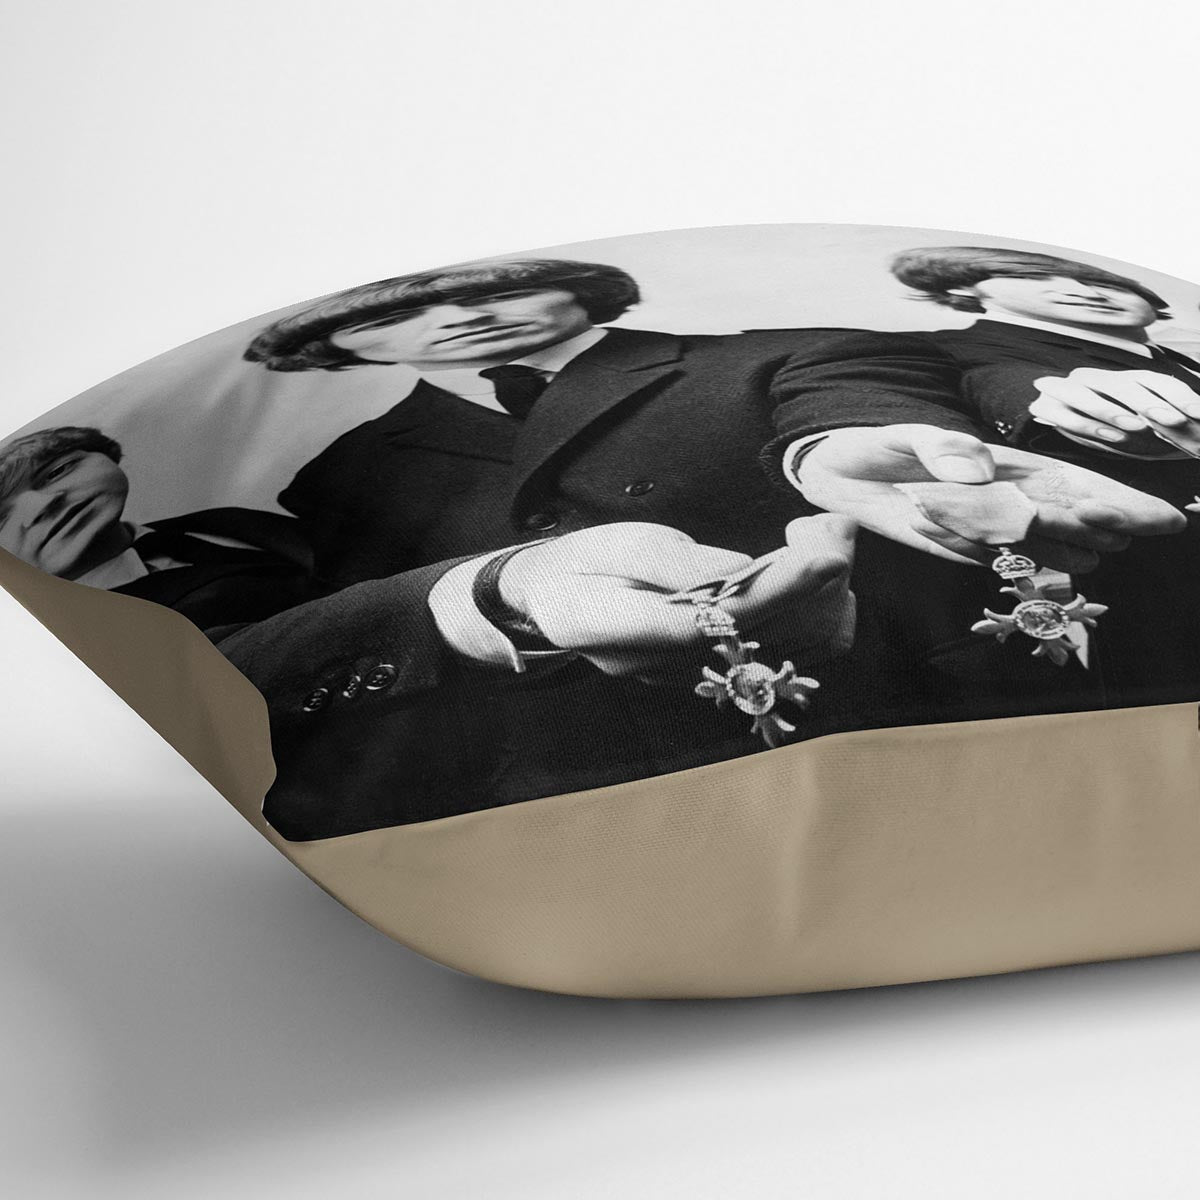 The Beatles with their MBEs Cushion